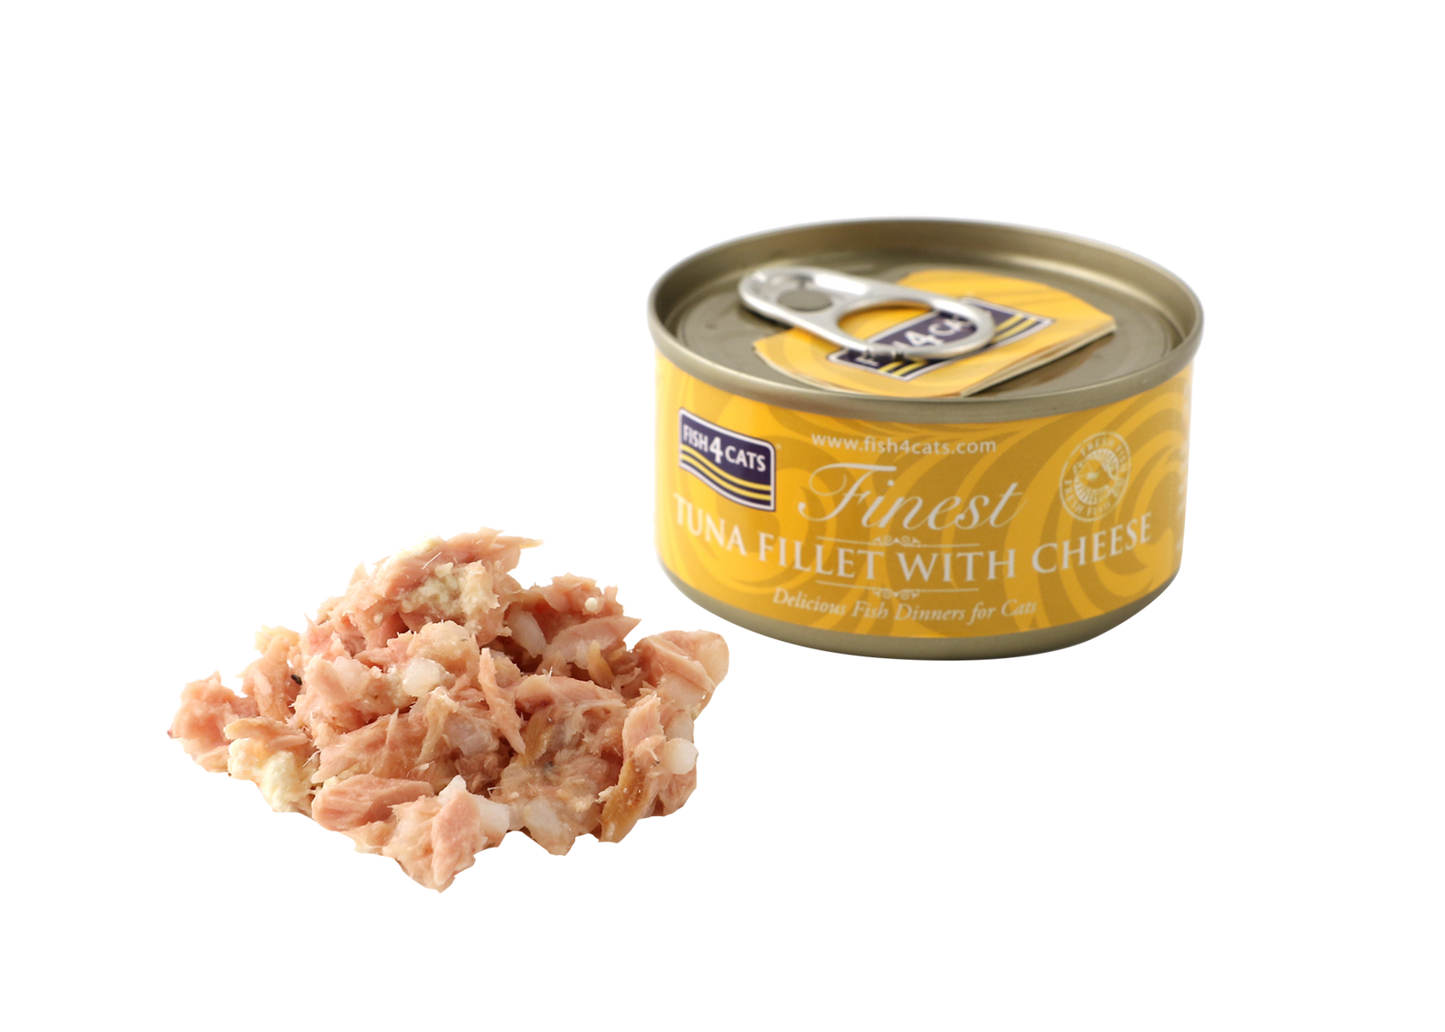 Fish4Cats Tuna Fillet with Cheese Wet Cat Food Can 70g